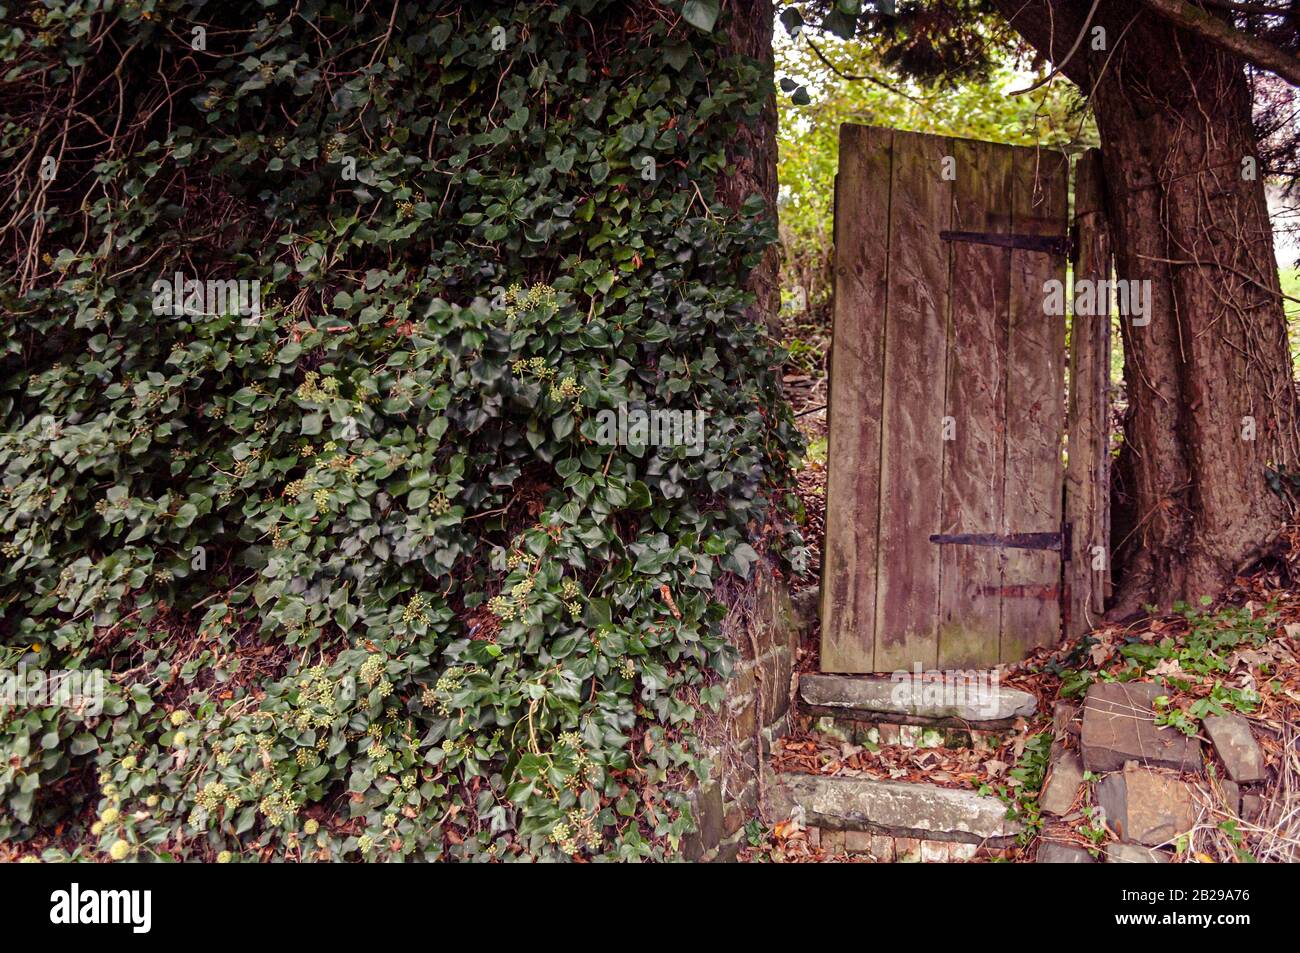 Set of stone steps leading up to an old, crooked, wooden, door.  Door is hanging between a tree trunk and an ivy covered wall. Stock Photo